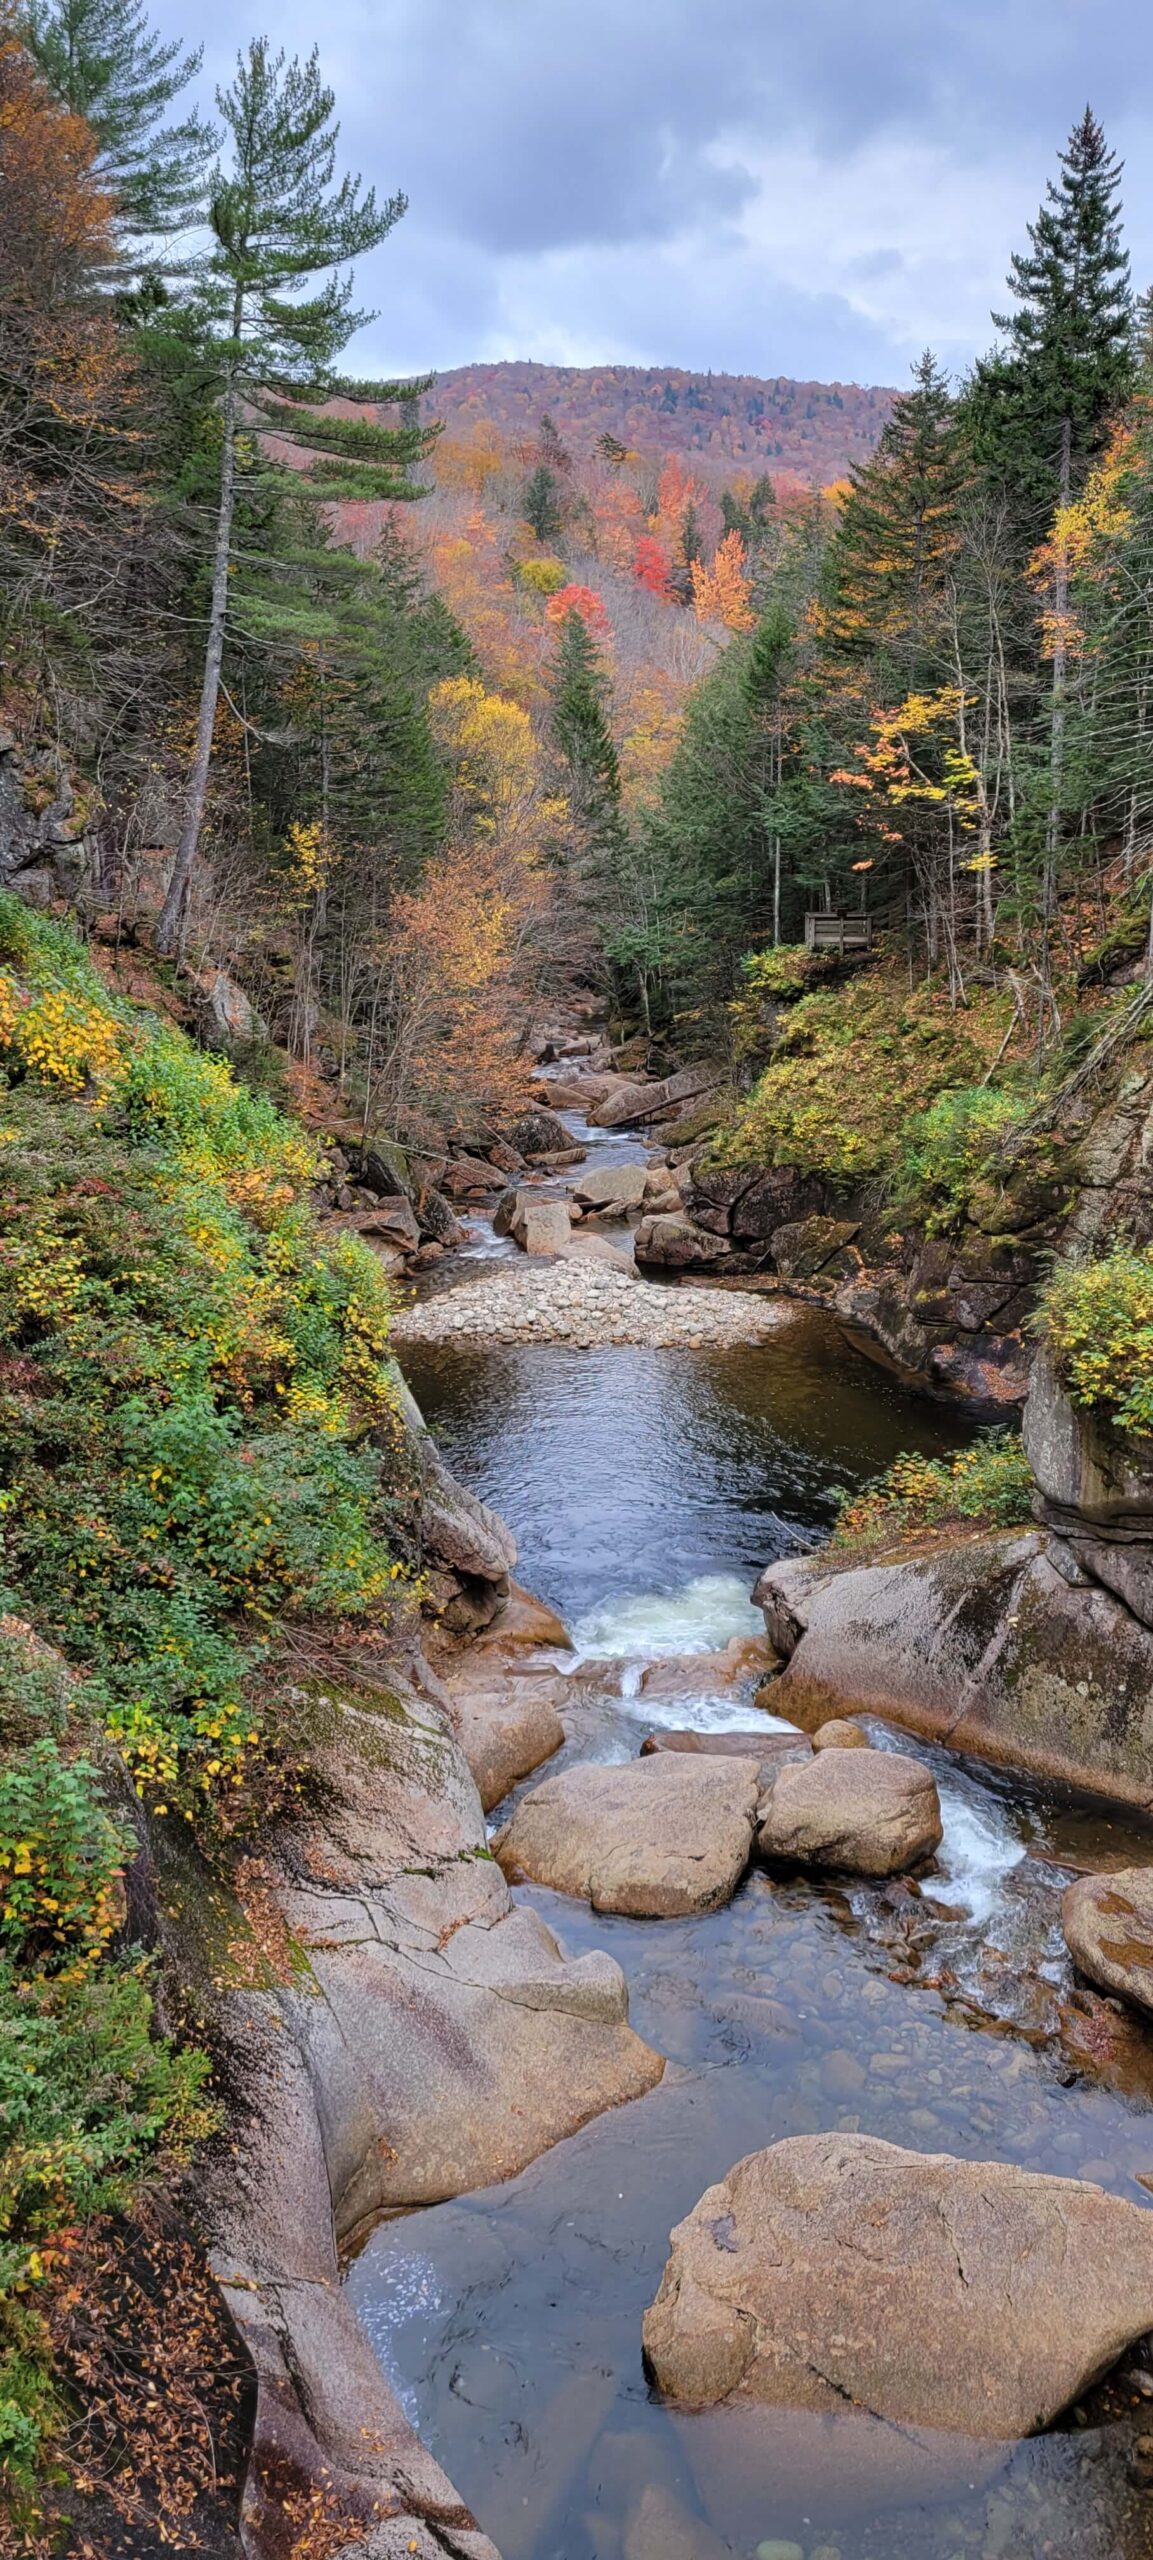 Best Spots for Fall Foliage in the White Mountains of NH: Flume Gorge